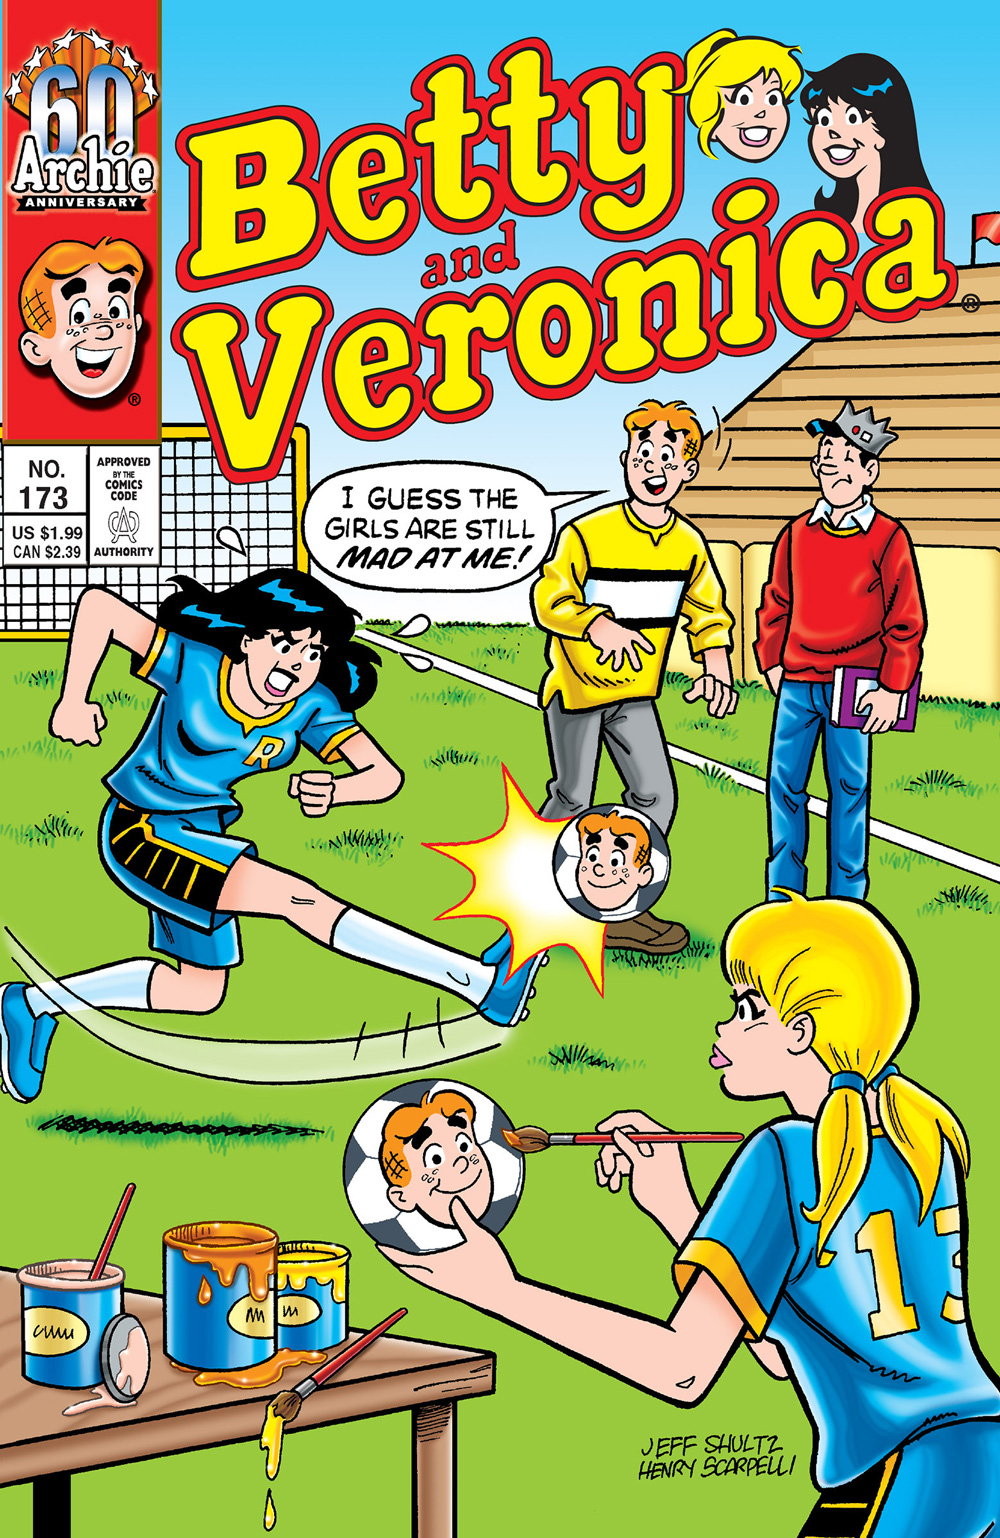 Betty and Veronica wear soccer uniforms on a soccer field, with angry facial expressions. Veronica is kicking a ball with Archie's face on it, while Betty paints another one with his face. Archie and Jughead stand off to the side and Archie says the girls are still mad at him.